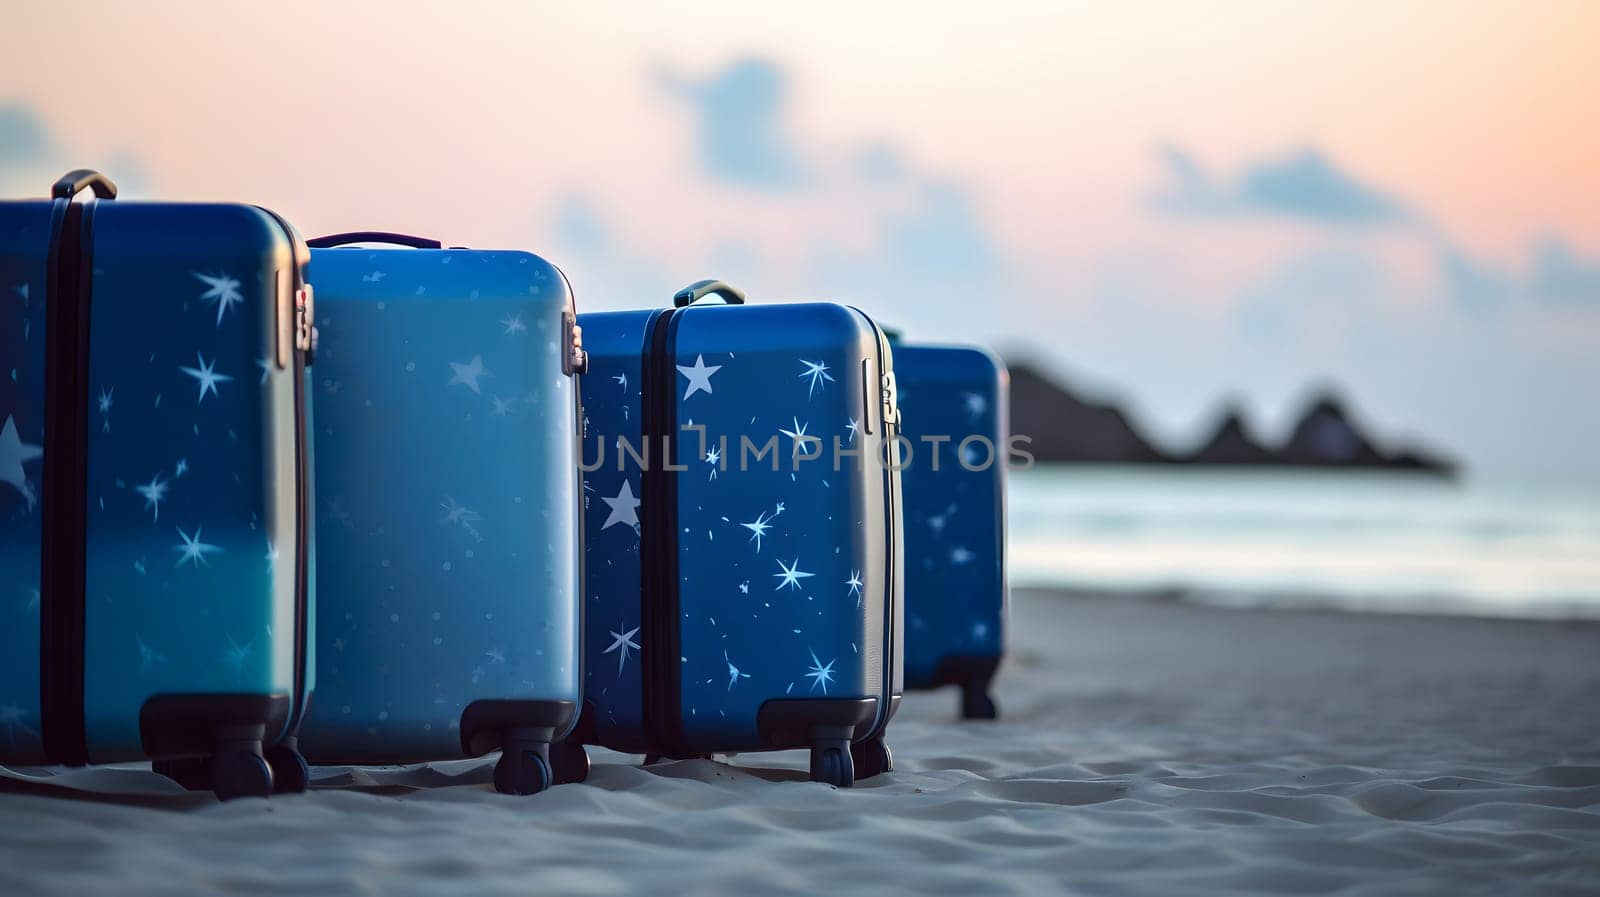 Few modern blue suitcases on tropical resort beach at morning. Neural network generated in May 2023. Not based on any actual person, scene or pattern.